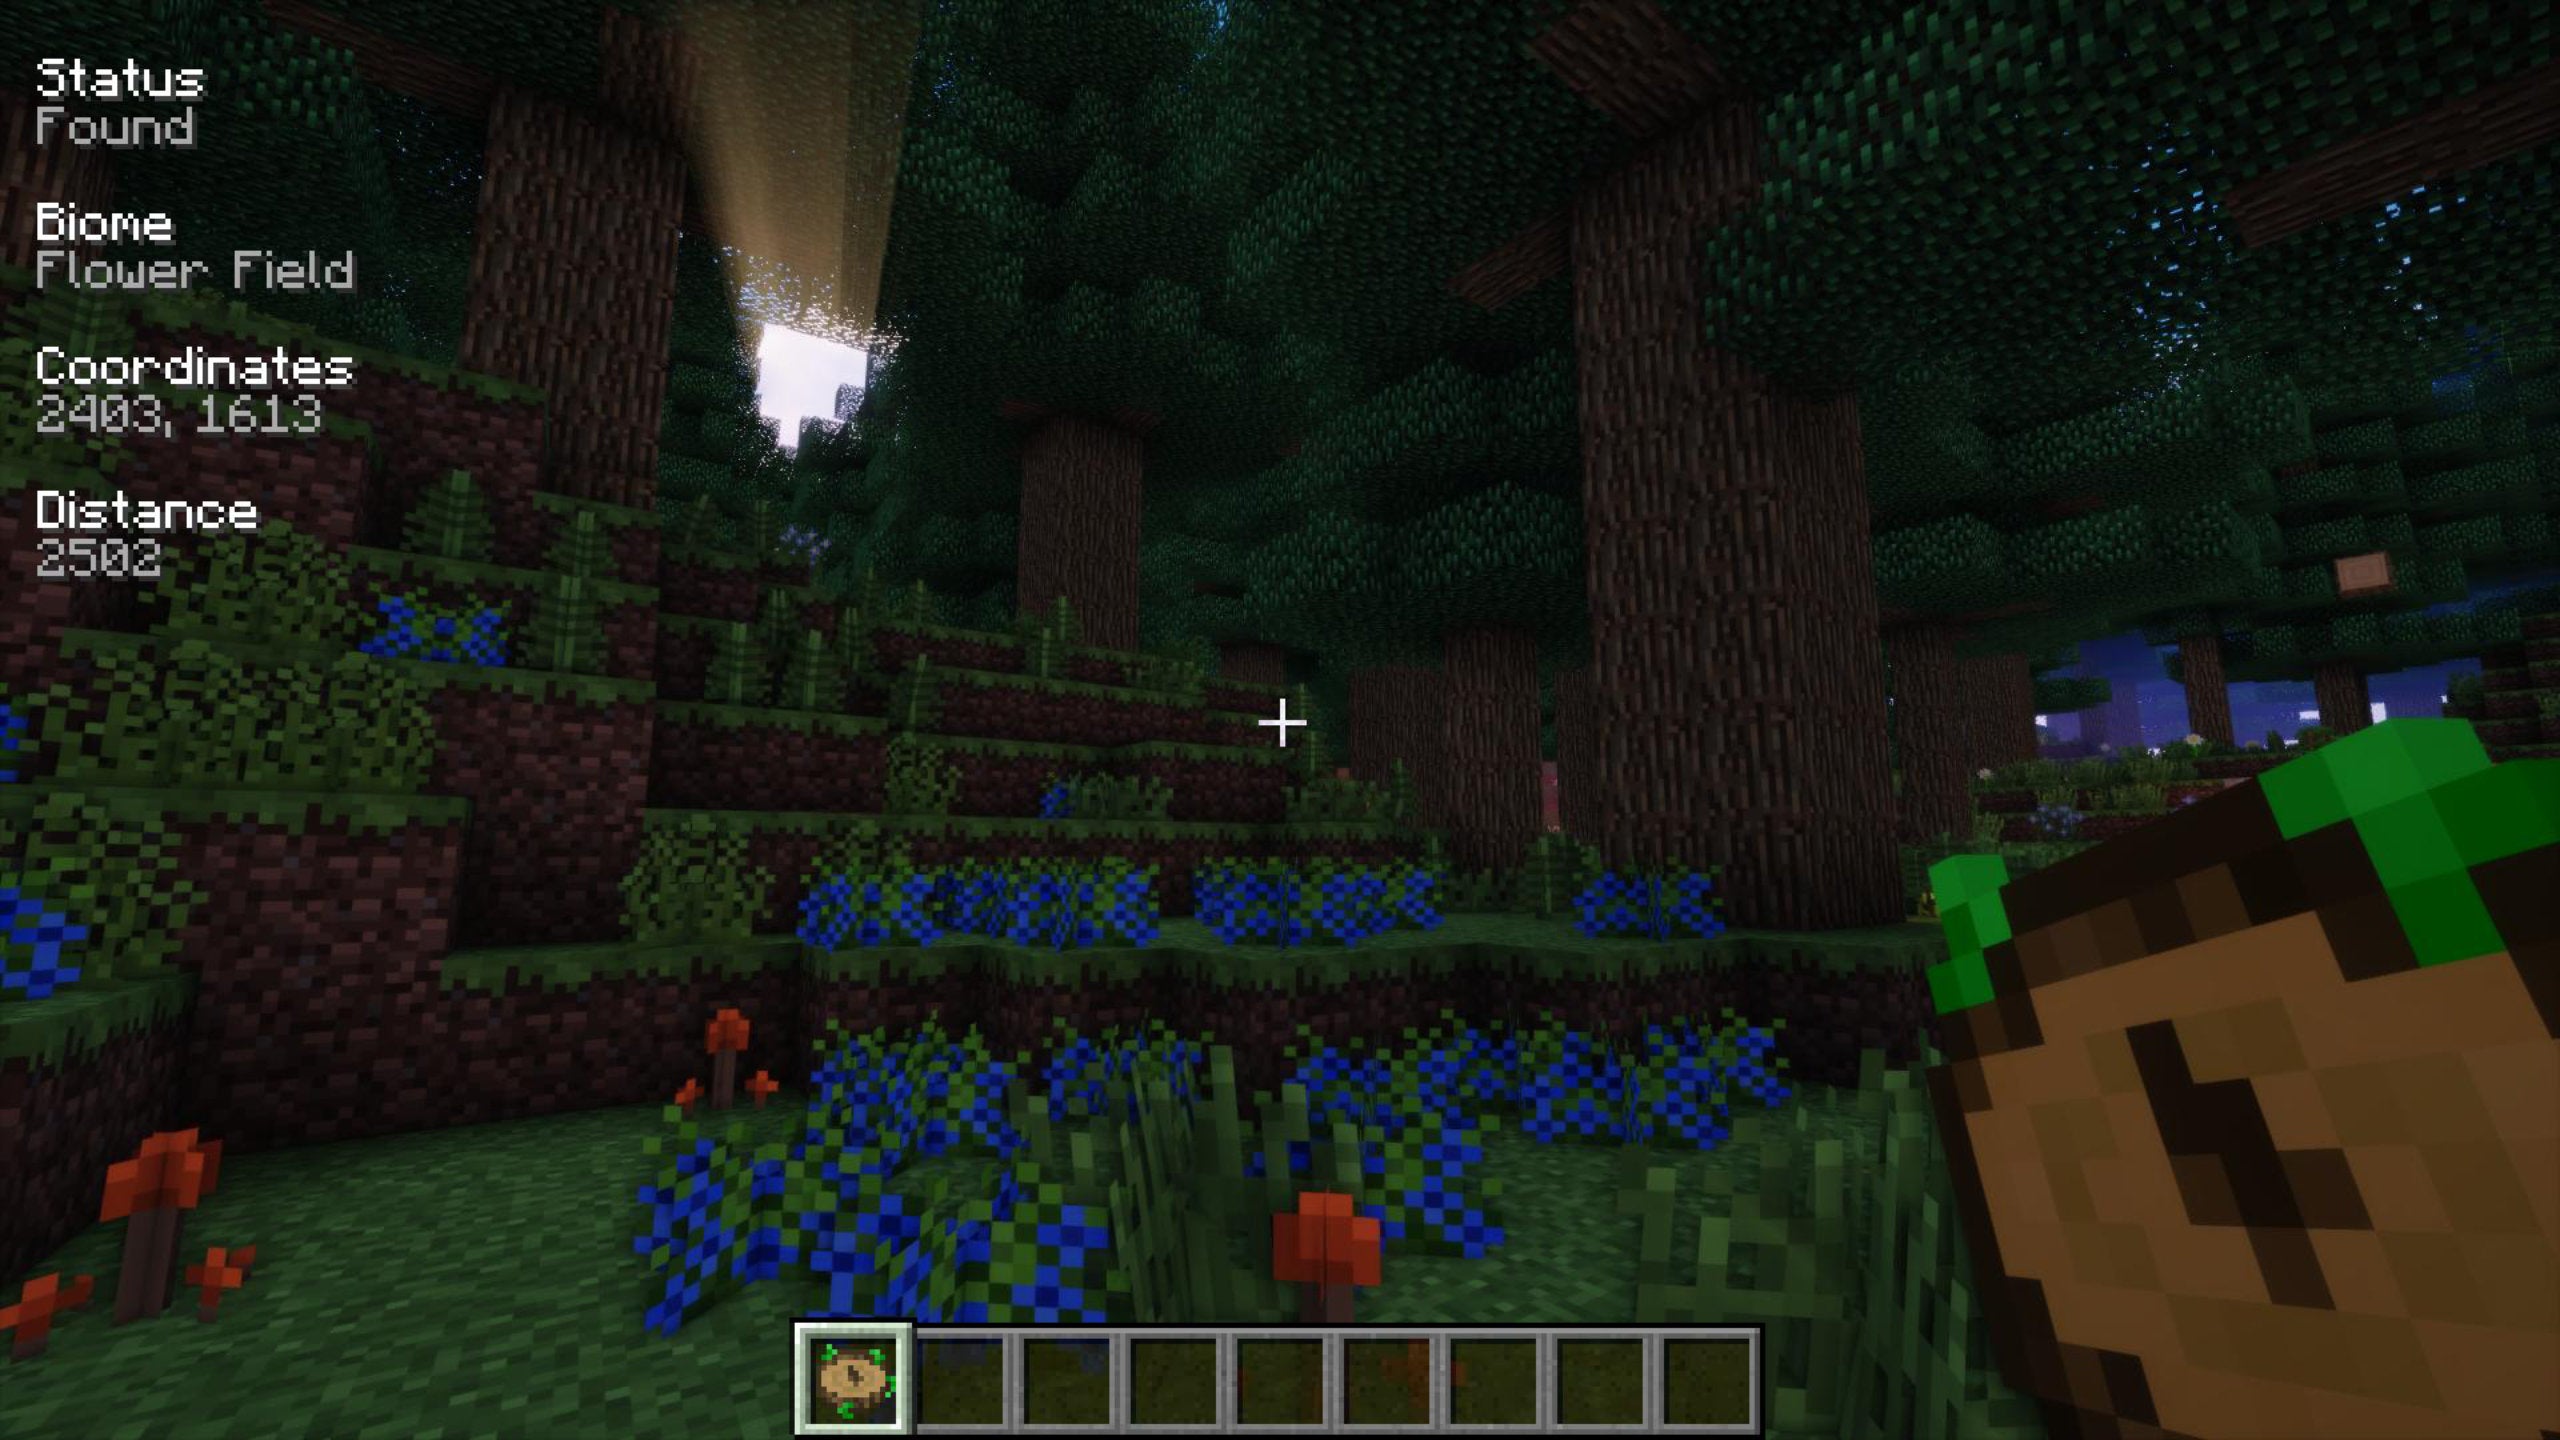 A screenshot of the Nature's Compass mod item in Minecraft pointing the player towards a biome of their choice.